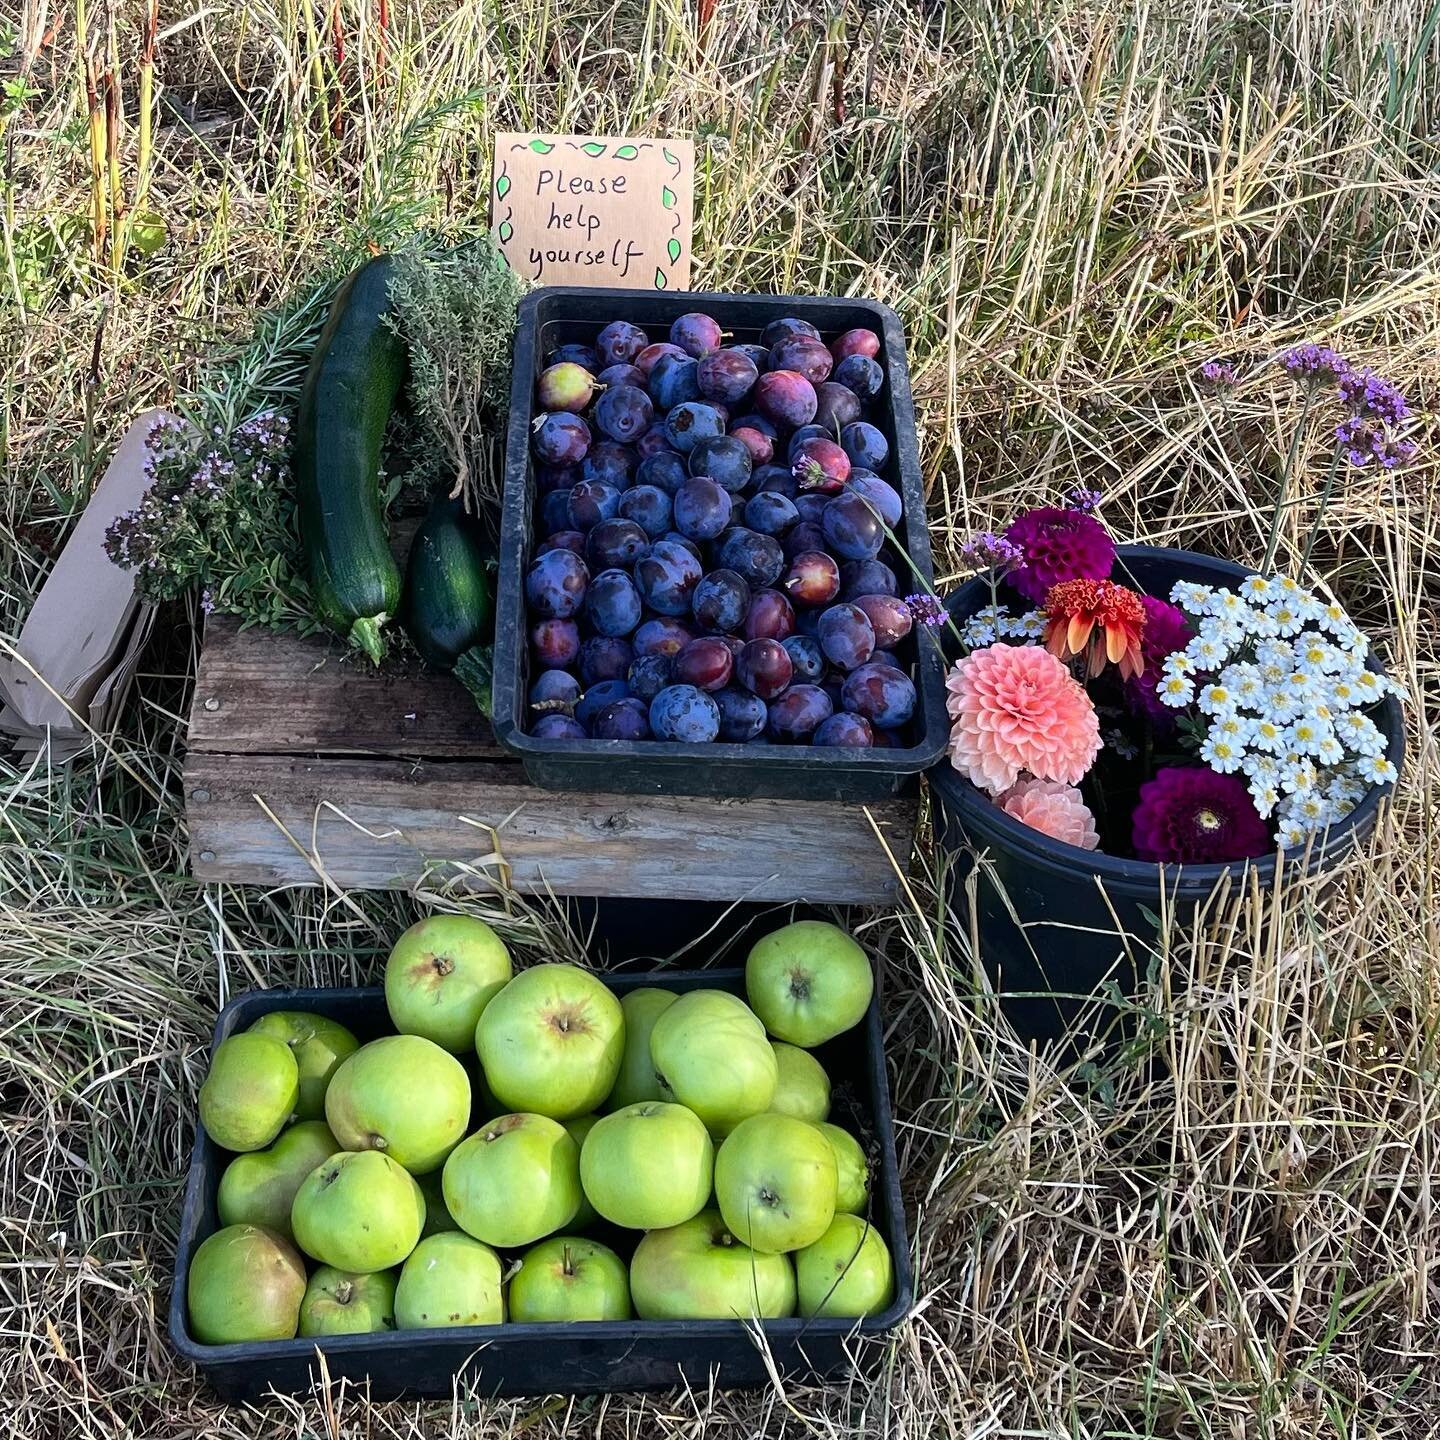 By-the-footpath stall - if you&rsquo;re passing by please help yourself!🍎🍃

#nature #vegetables #countryliving #countryside #countrylife #walkers 
#bookstagram #book #booktok #bookrecommendations #booklove #writerscommunity 
#bookclub #fictionwrite